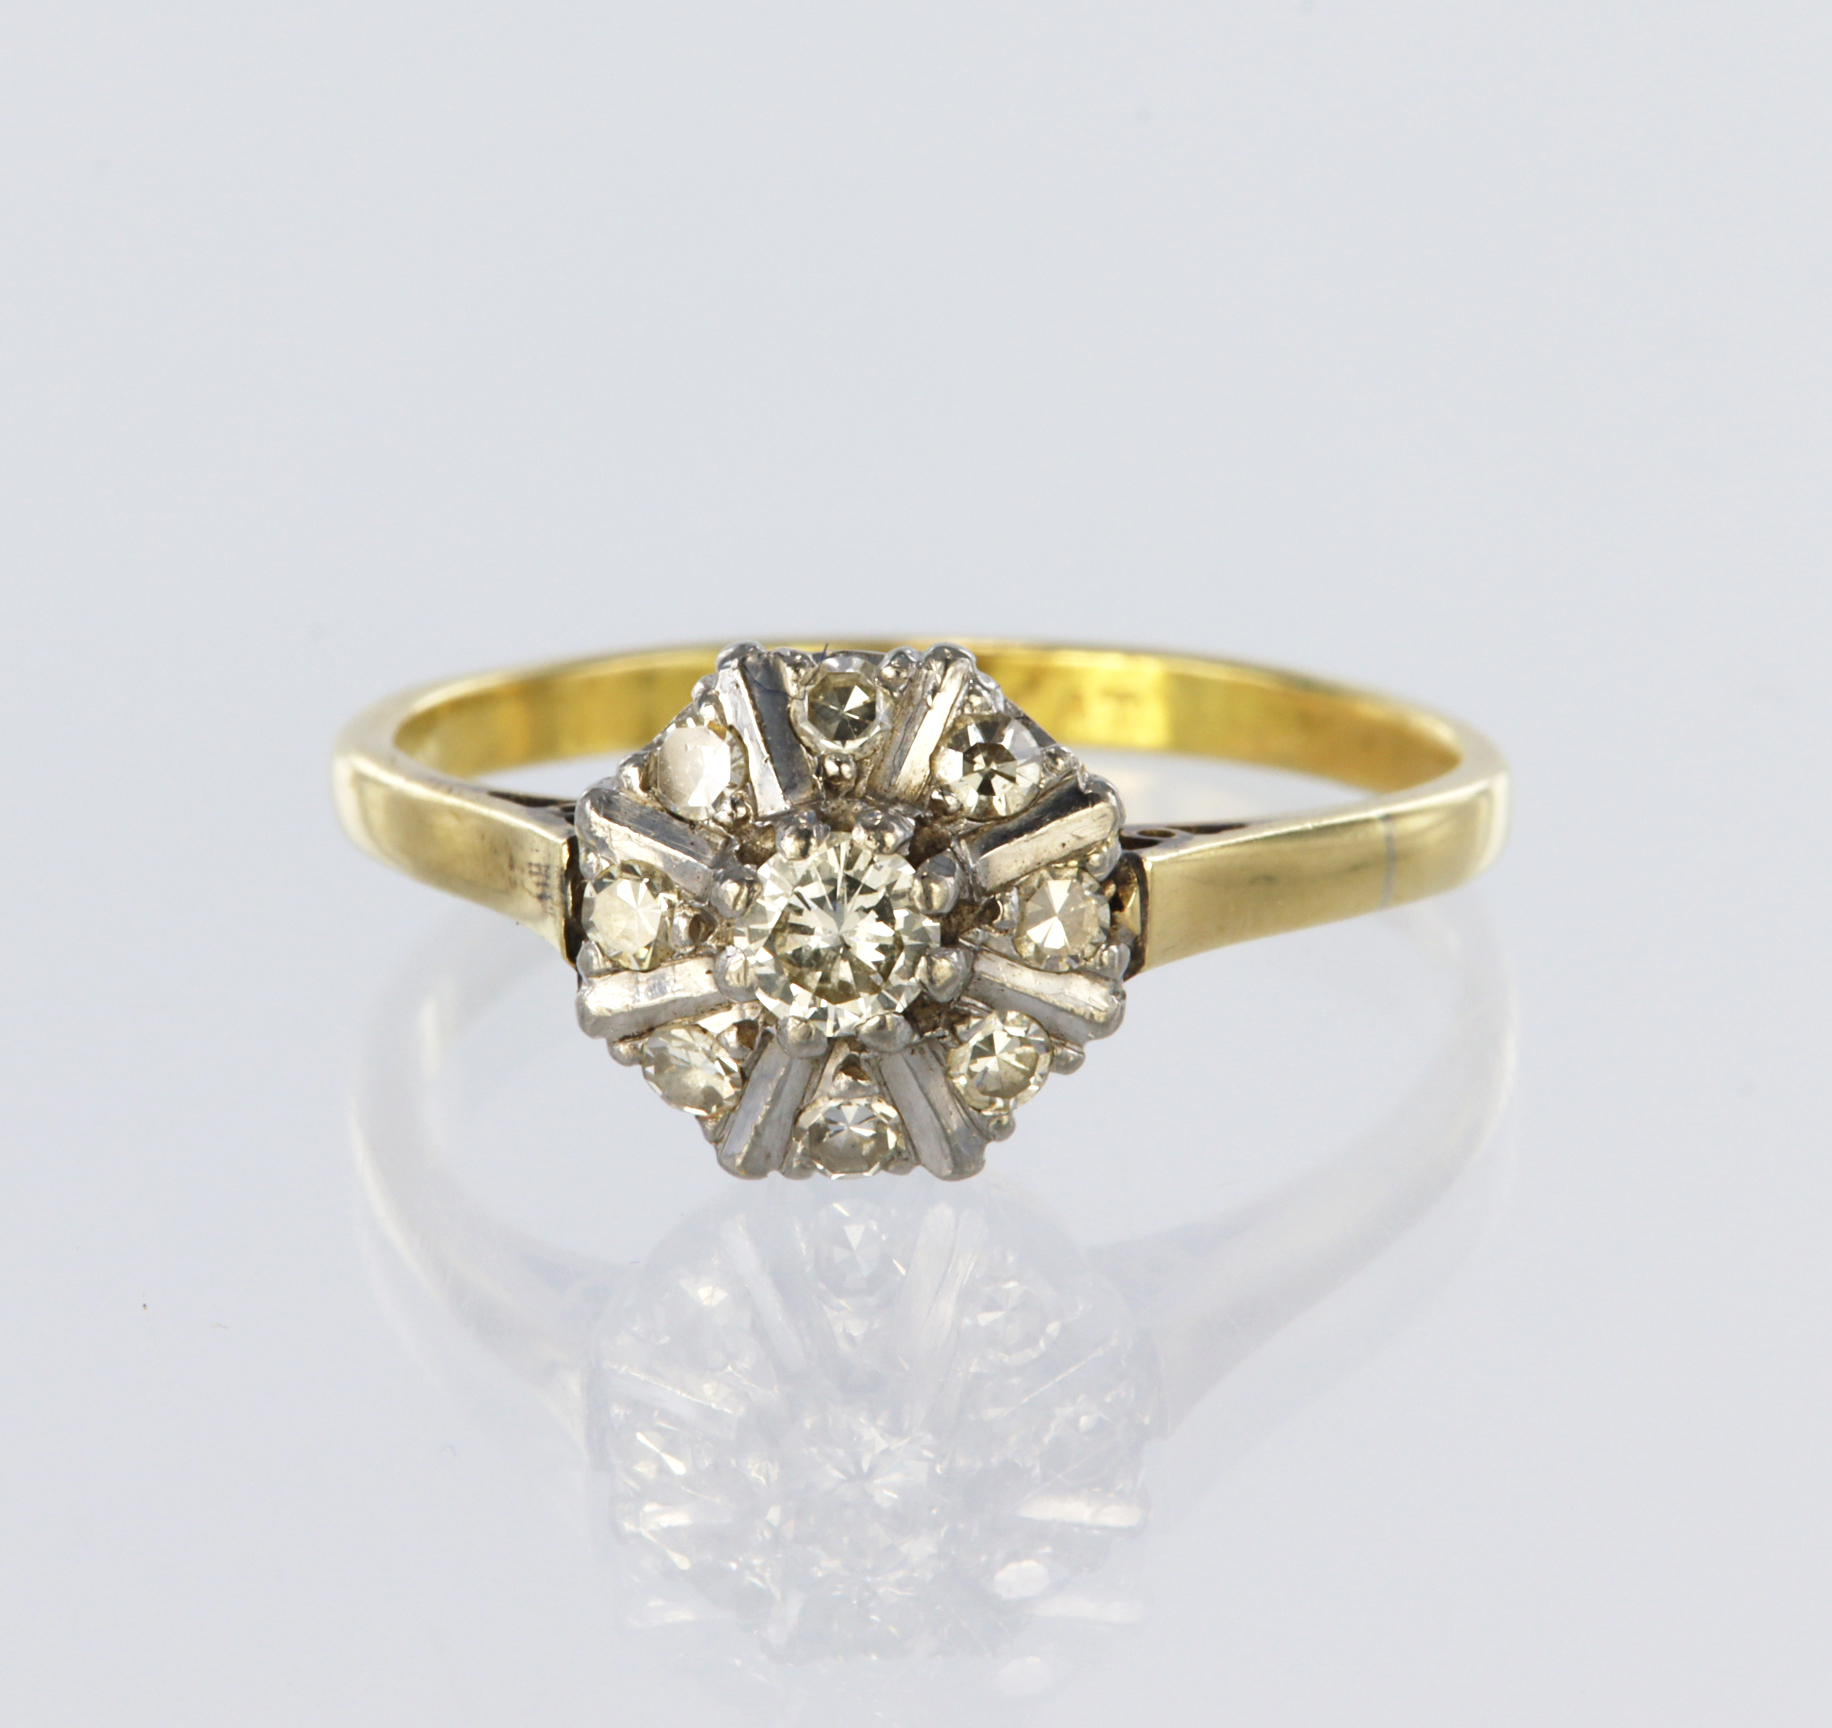 18ct yellow and white gold cluster ring set with a central round brilliant cut diamond weighing